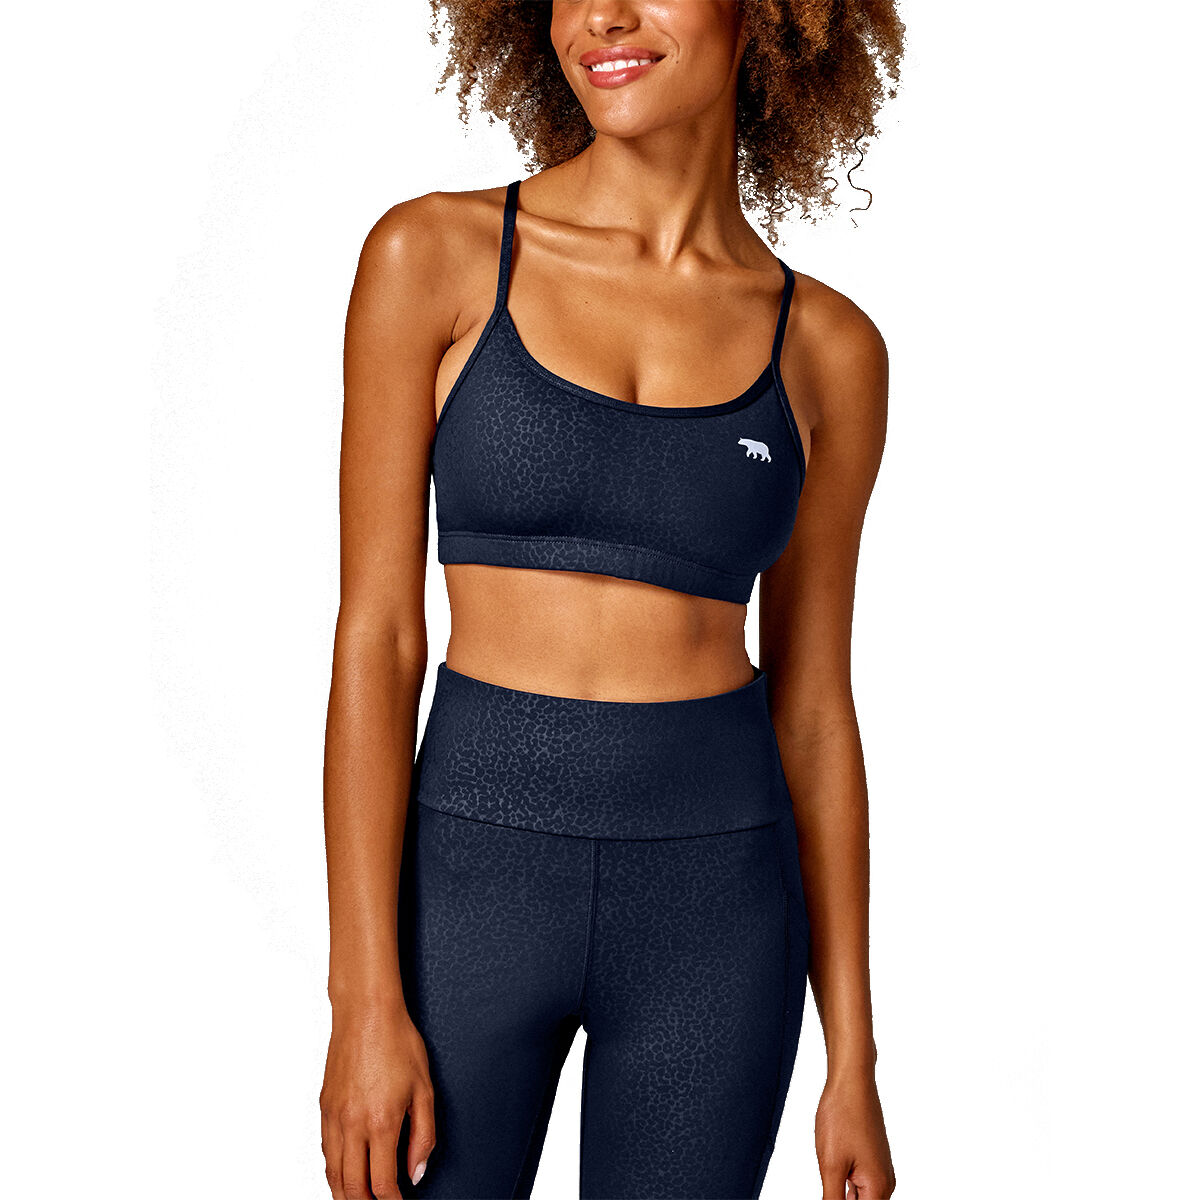 Running Bare Scoop Up Sports Bra Women - Buy Online - Ph: 1800-370-766 -  AfterPay & ZipPay Available!